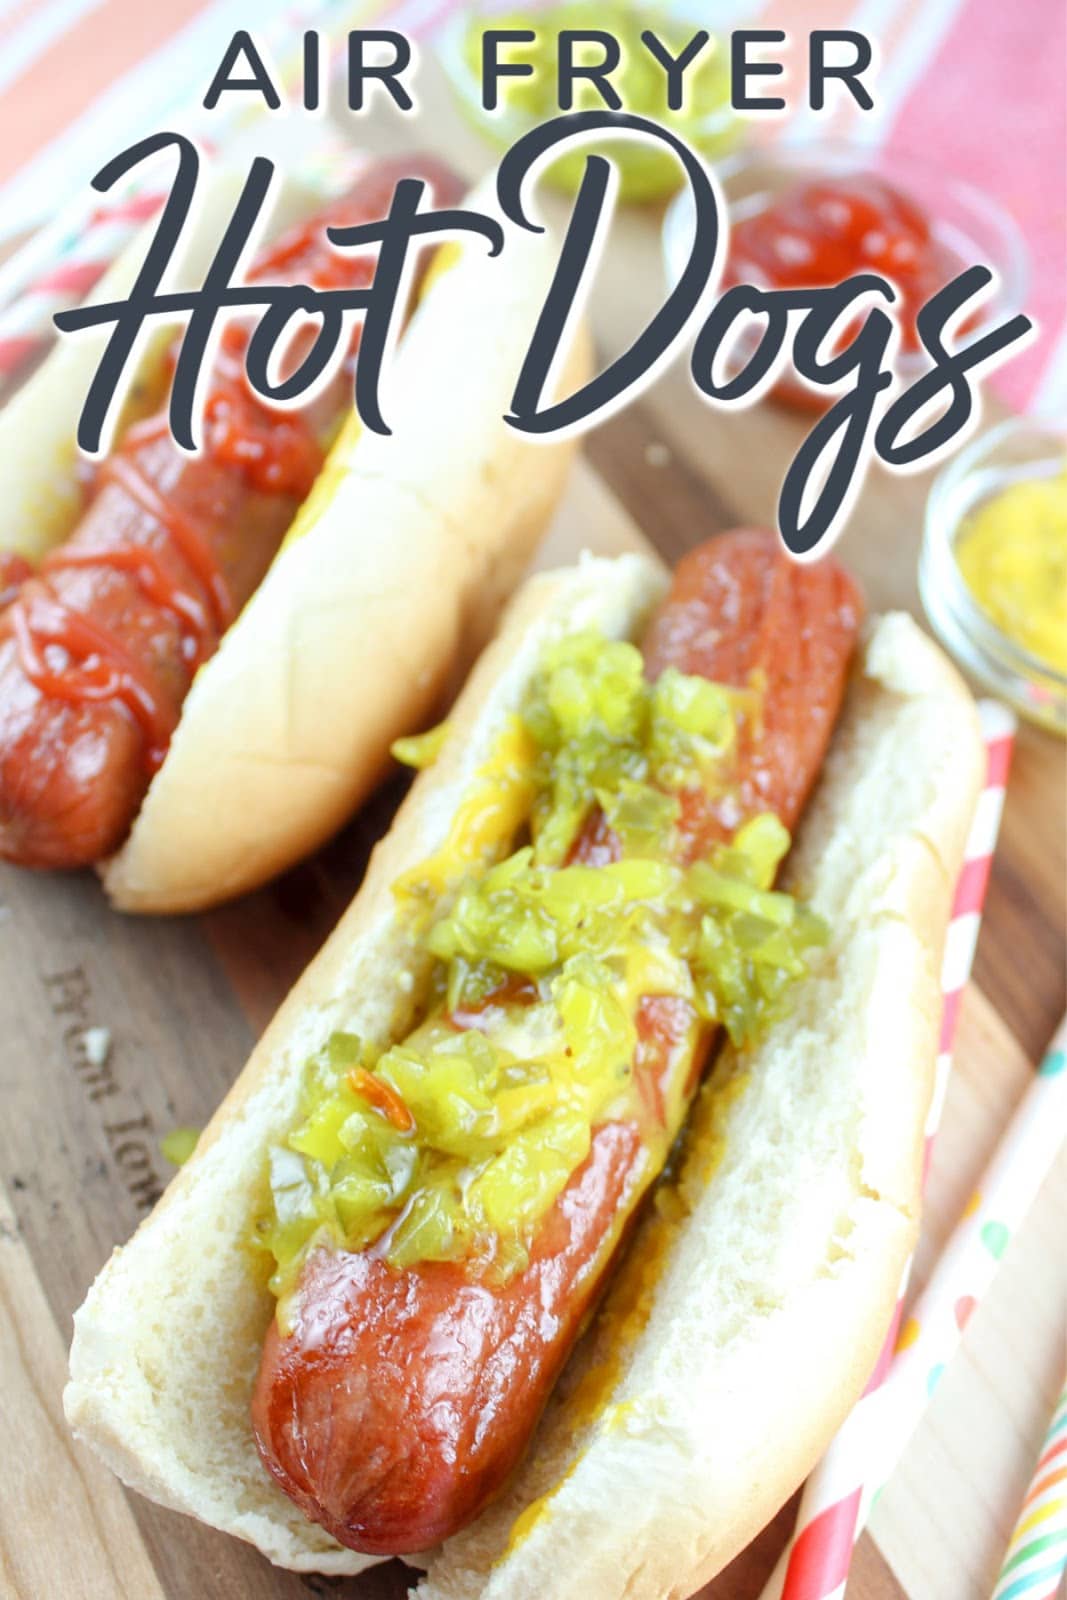 Hot Dogs in an air fryer are game changing! They’re cooked perfectly and taste like they’re meant to taste – juicy, meaty – so good! I’ll never make hot dogs another way!
 via @foodhussy